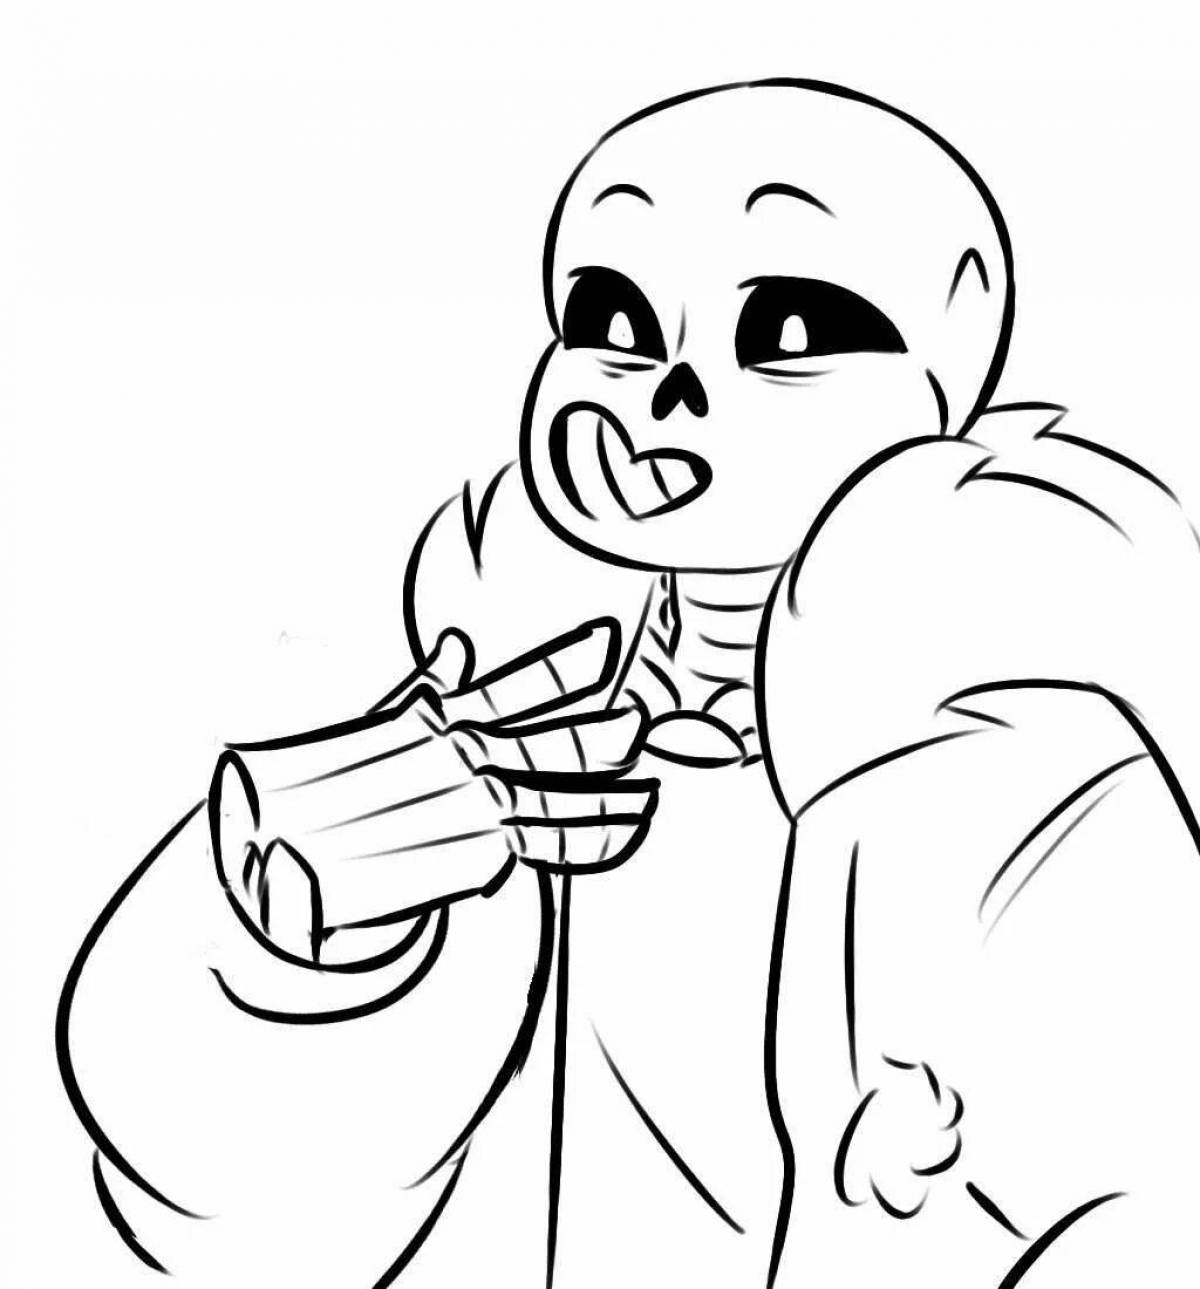 Charming undertail coloring by numbers